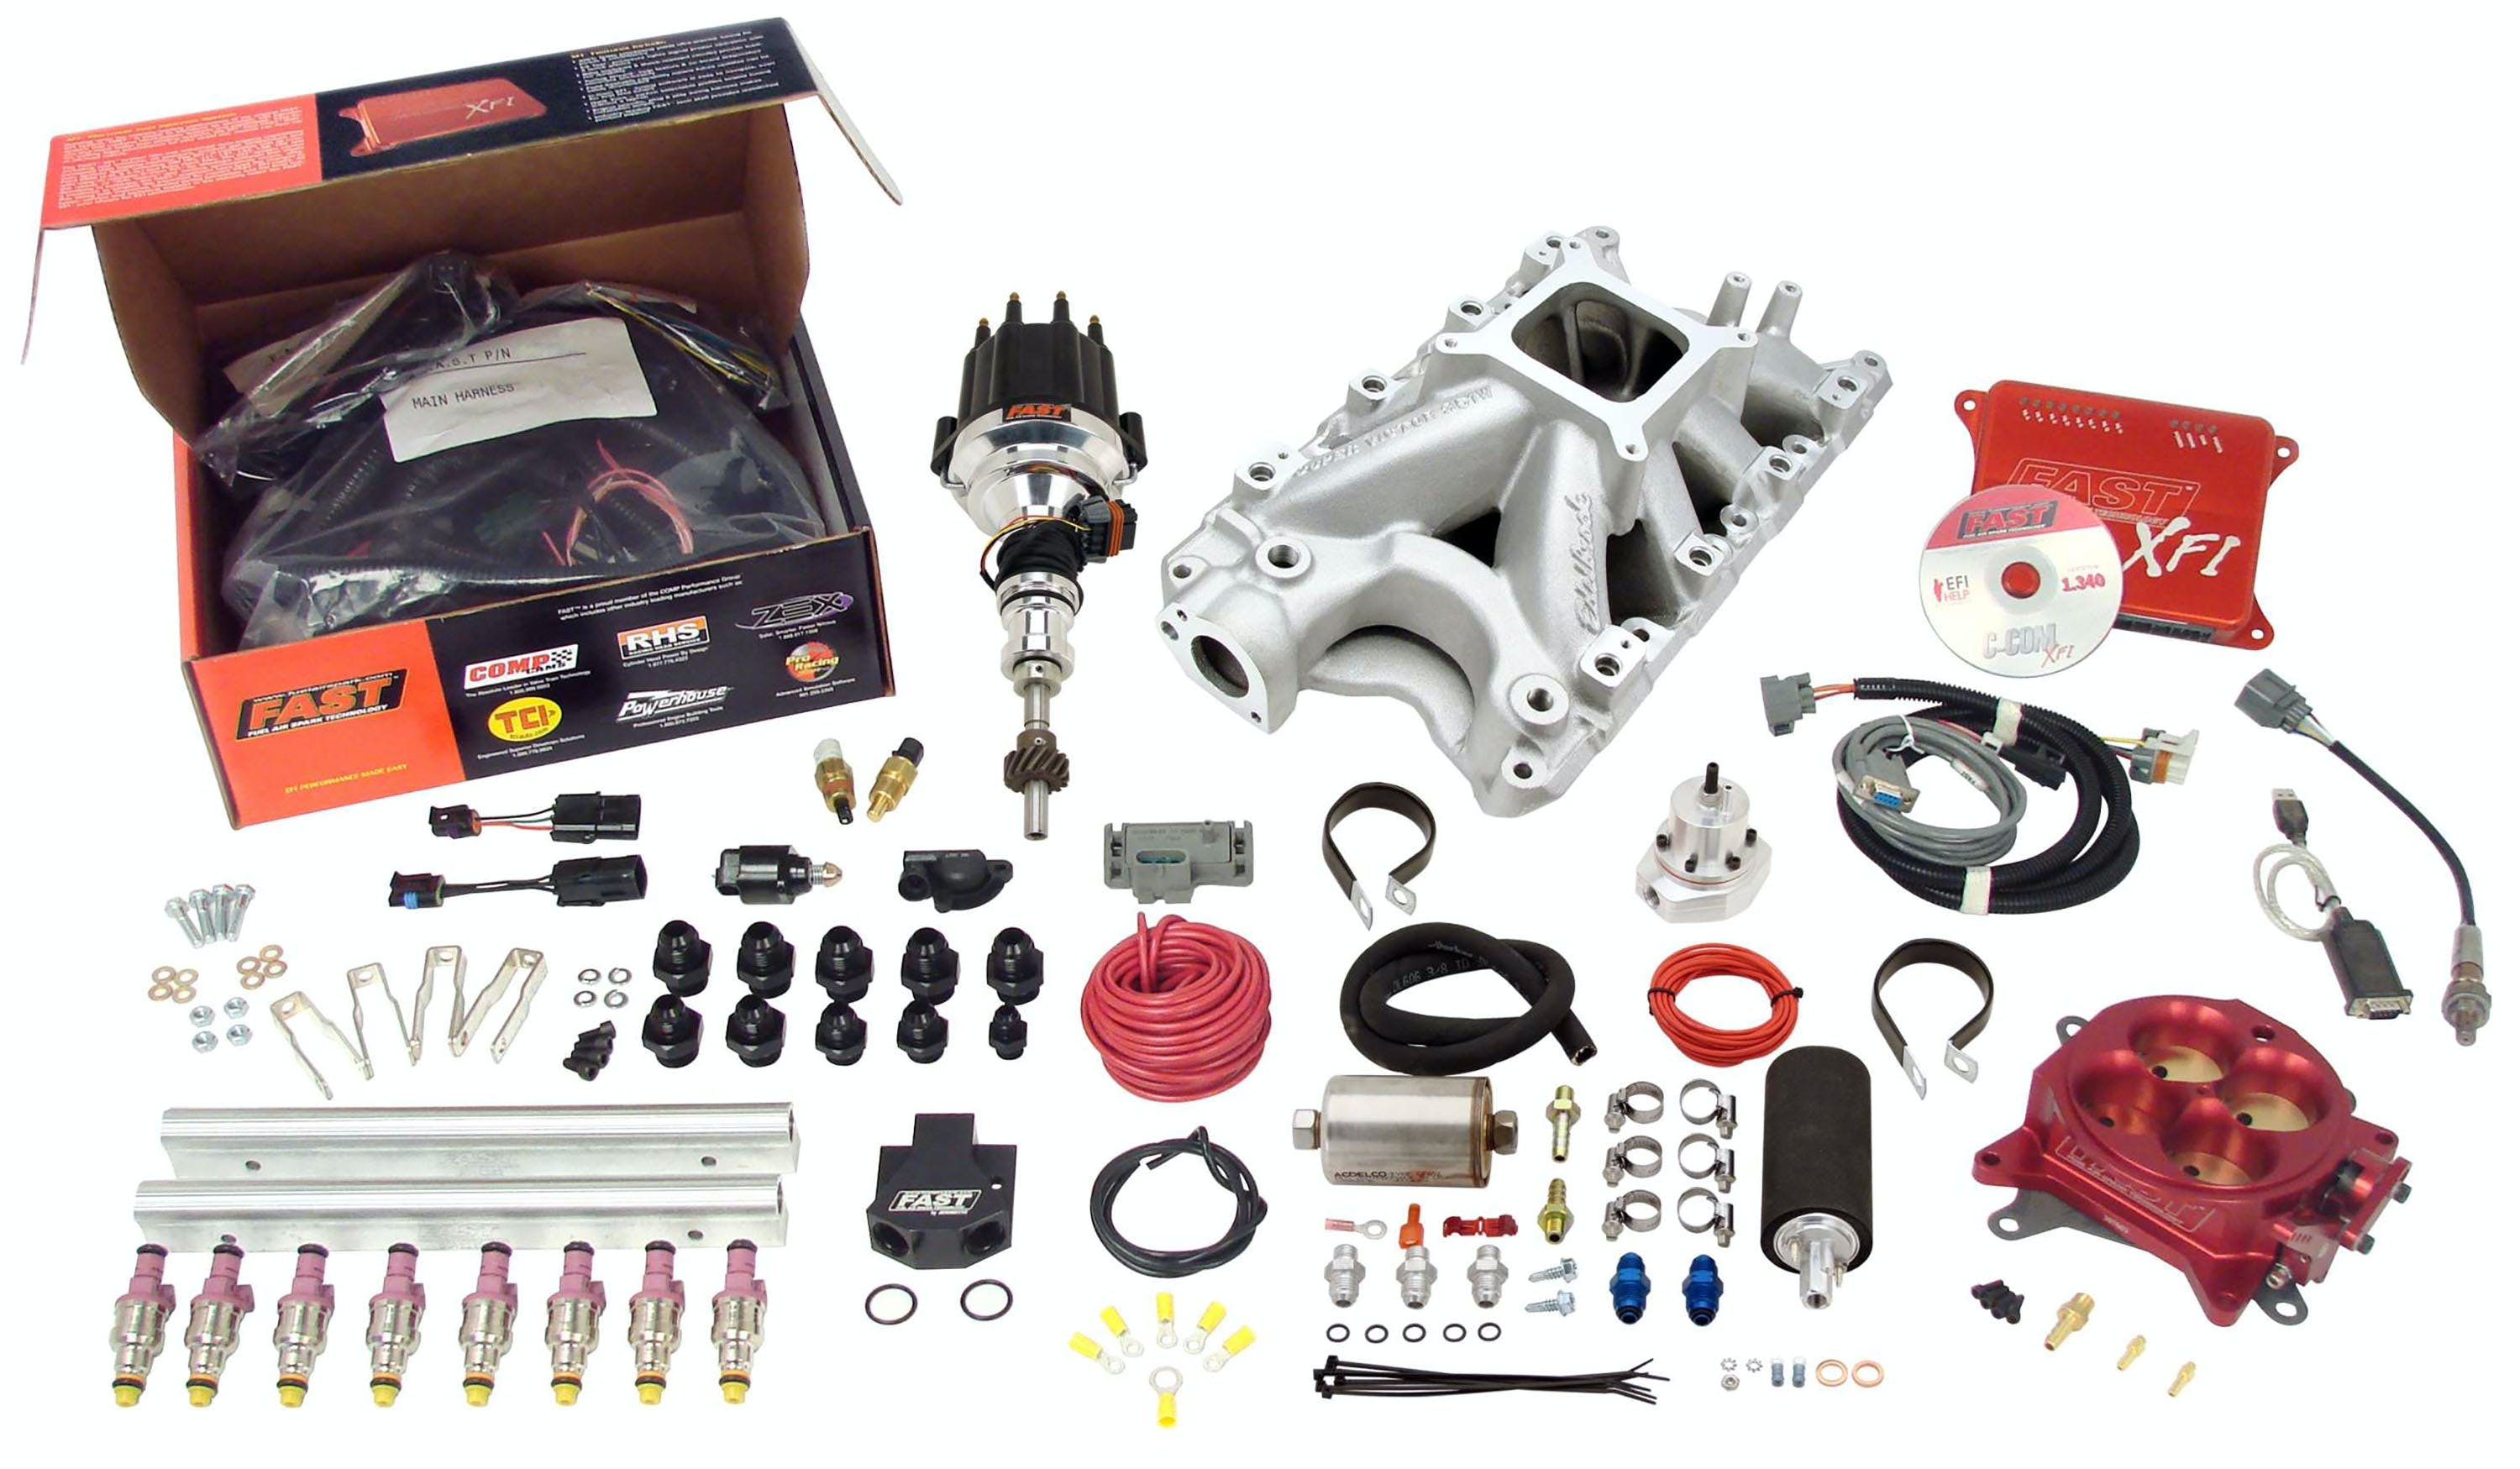 FAST - Fuel Air Spark Technology 3035351-10 XFI Windsor Kit with 1000HP Pump